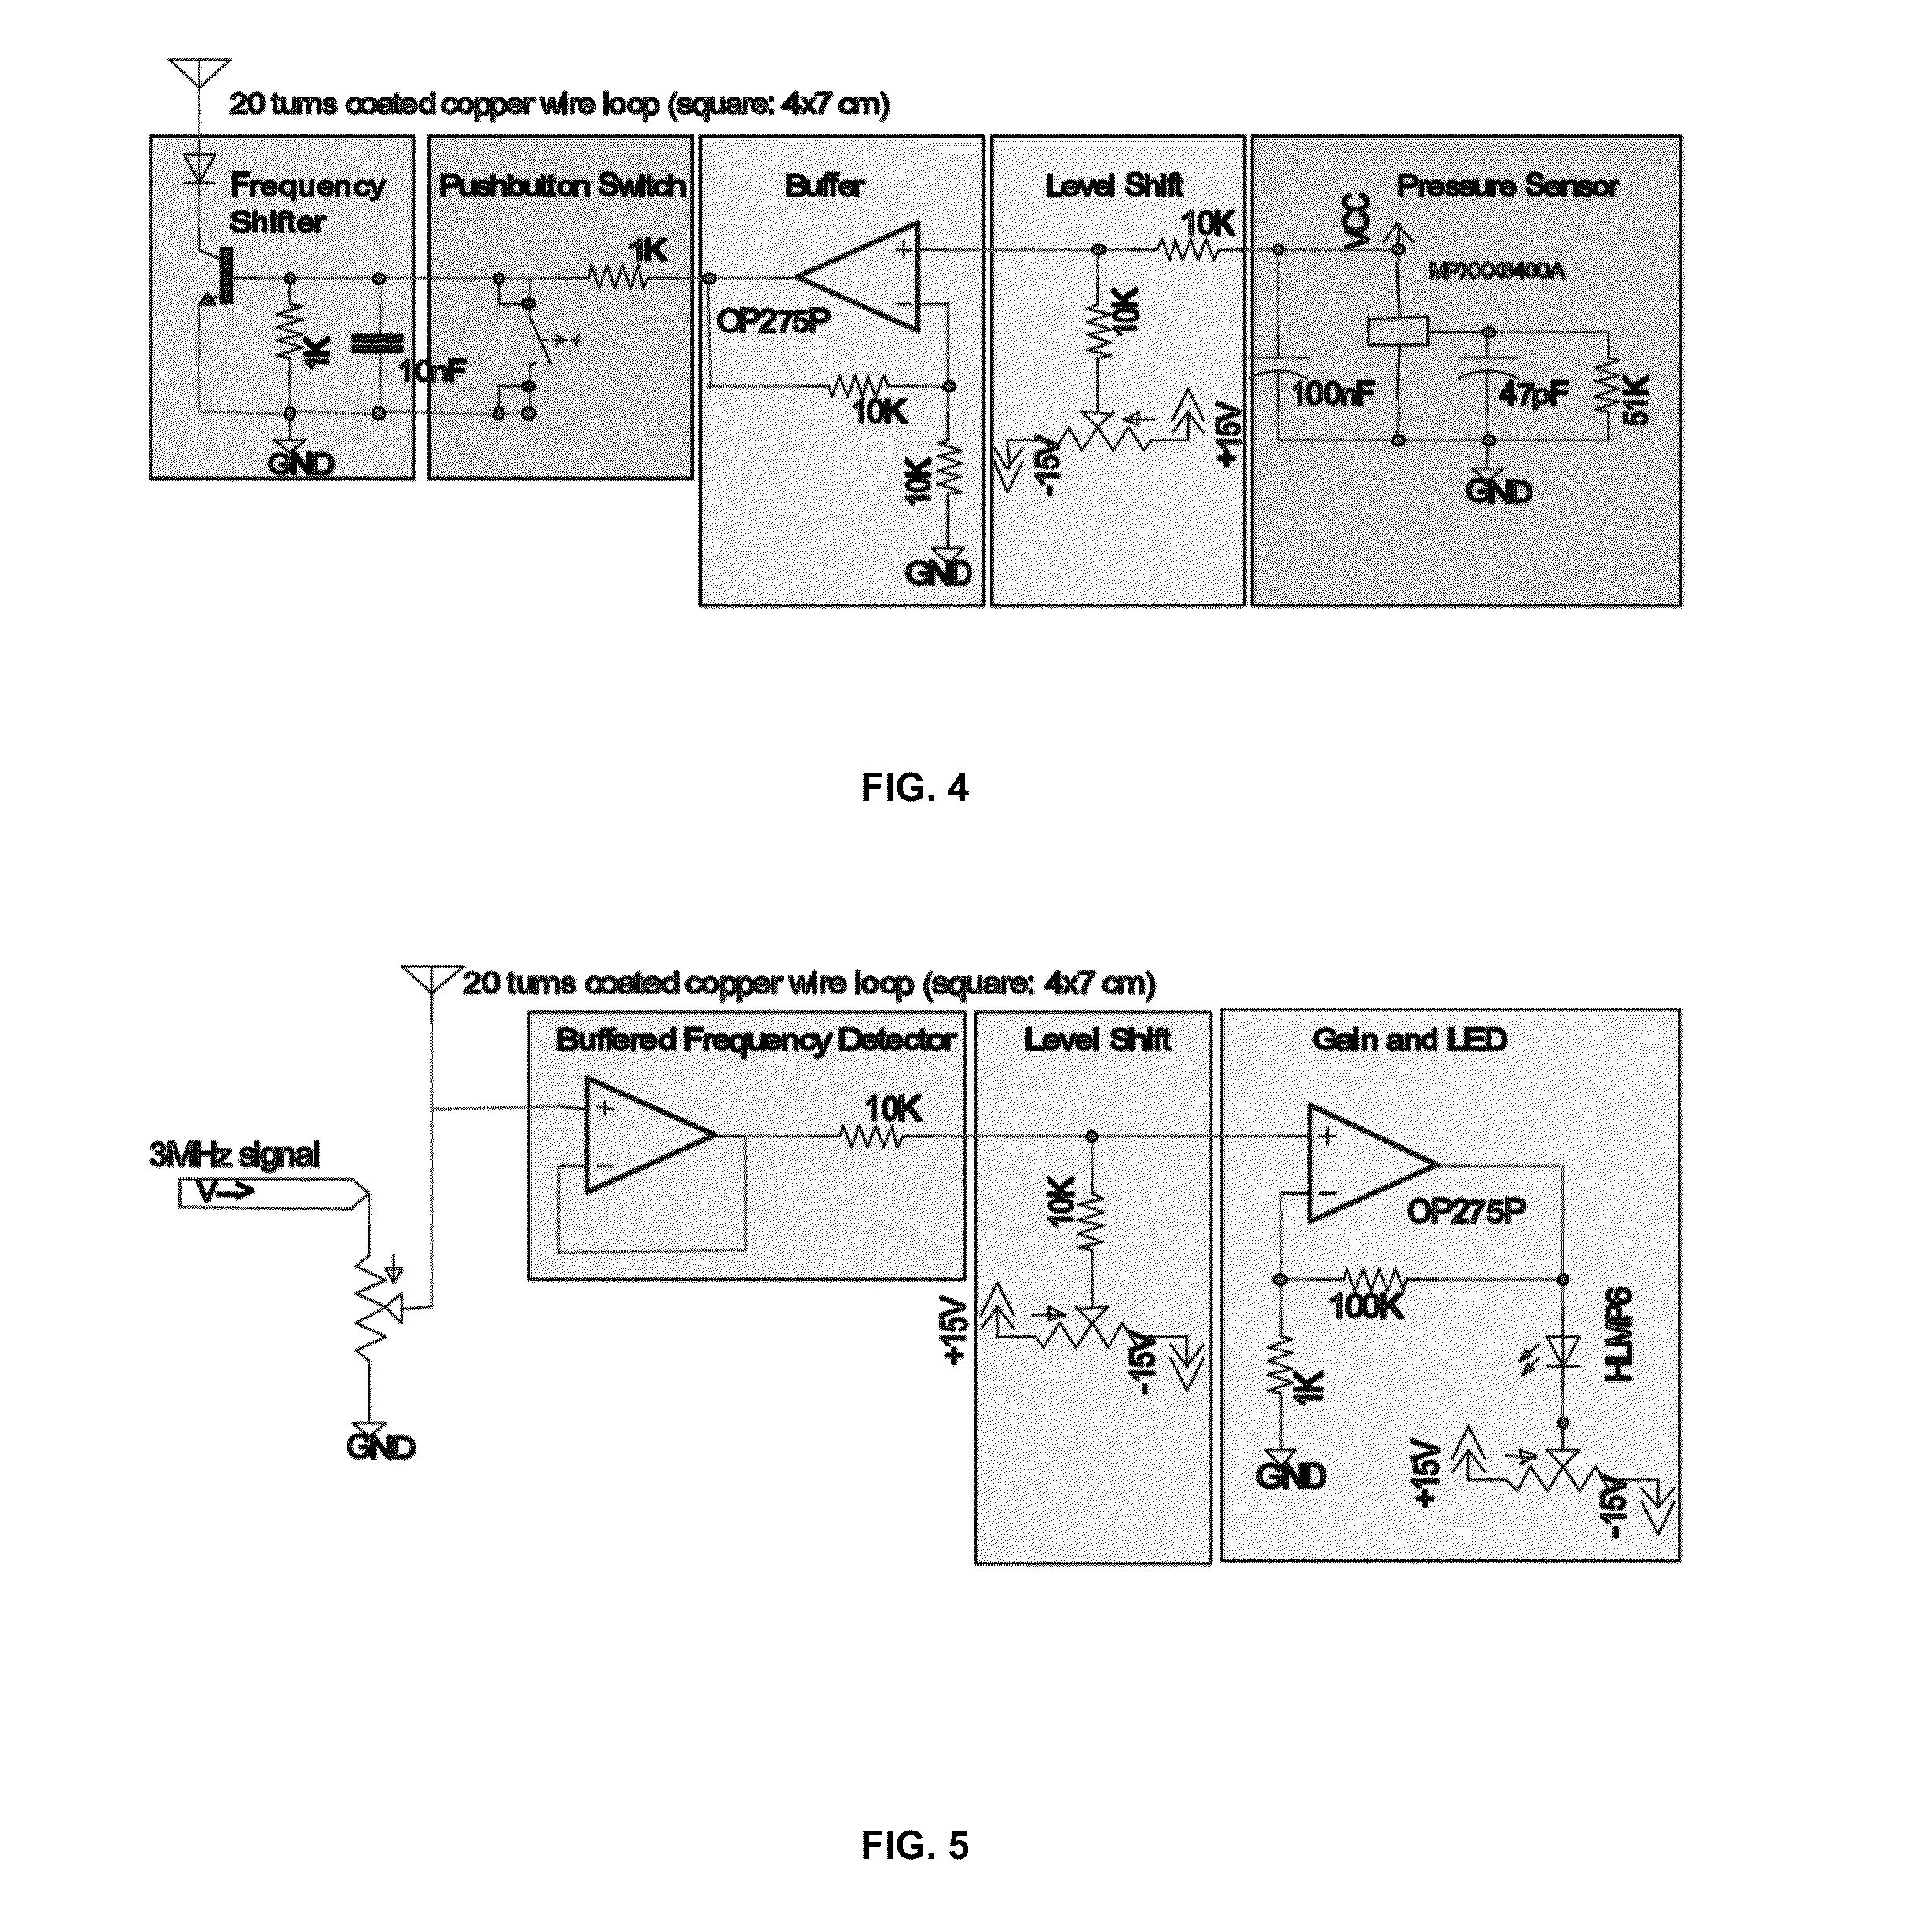 Method for RFID Communication Using Inductive Orthogonal Coupling For Wireless Medical Implanted Sensors and Other Short-Range Communication Applications